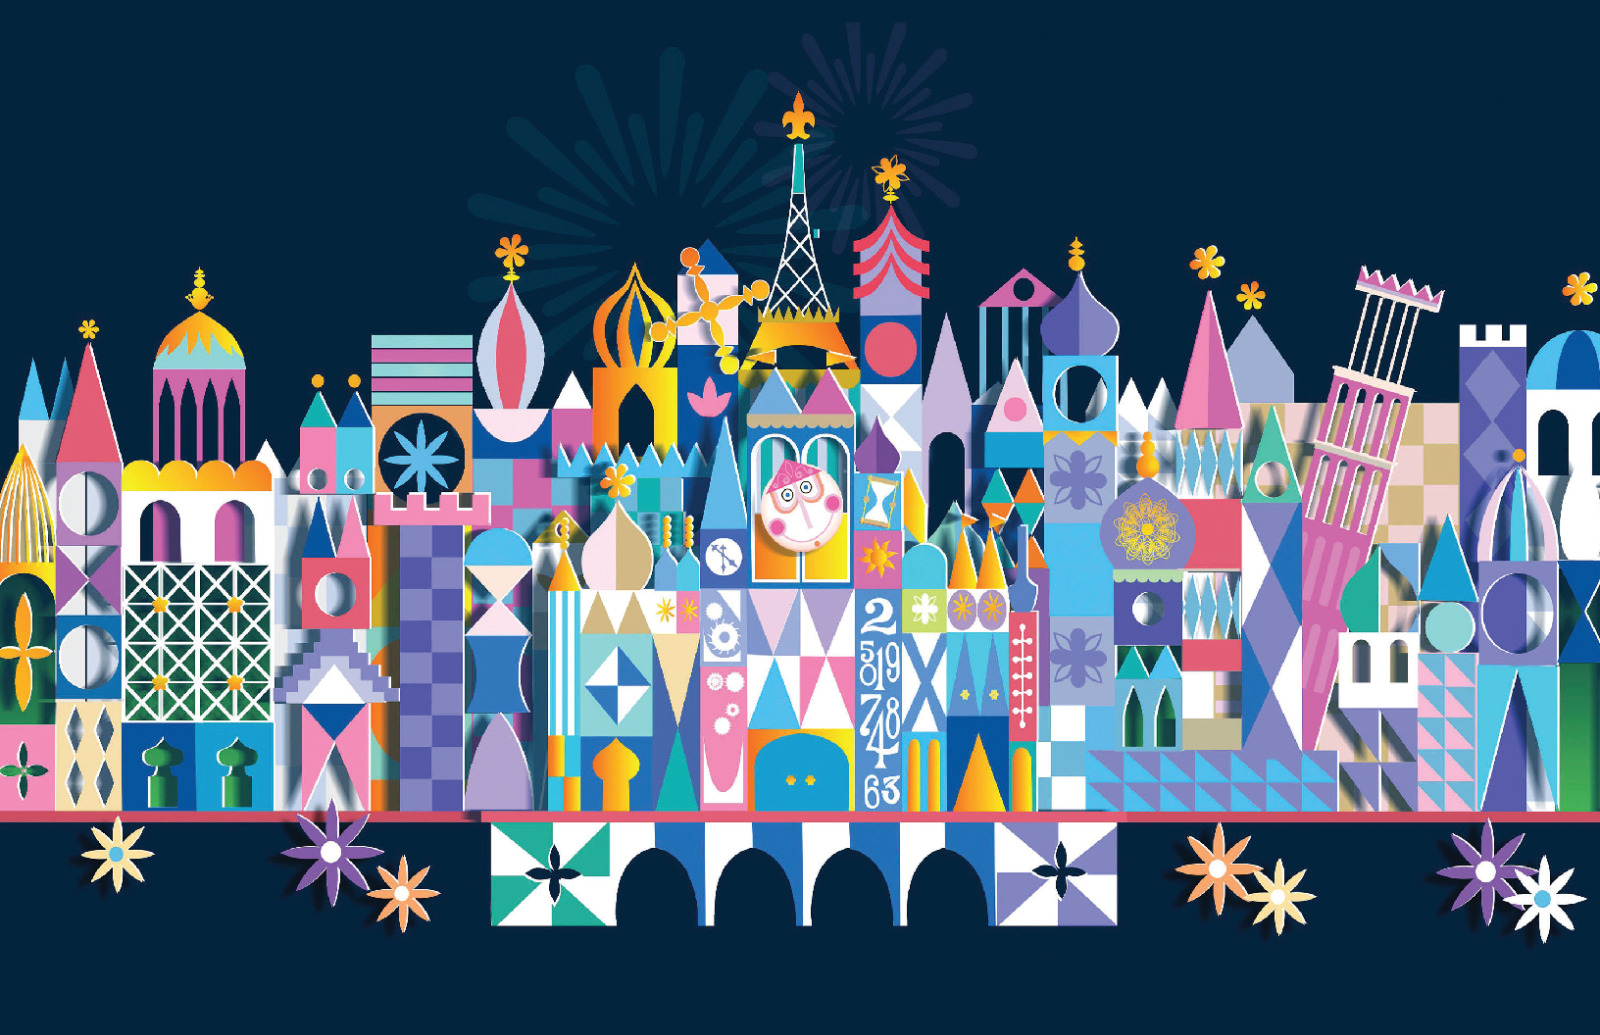 Its a Small World Rolly Crump Disney Ride Attraction 3d Clock Poster